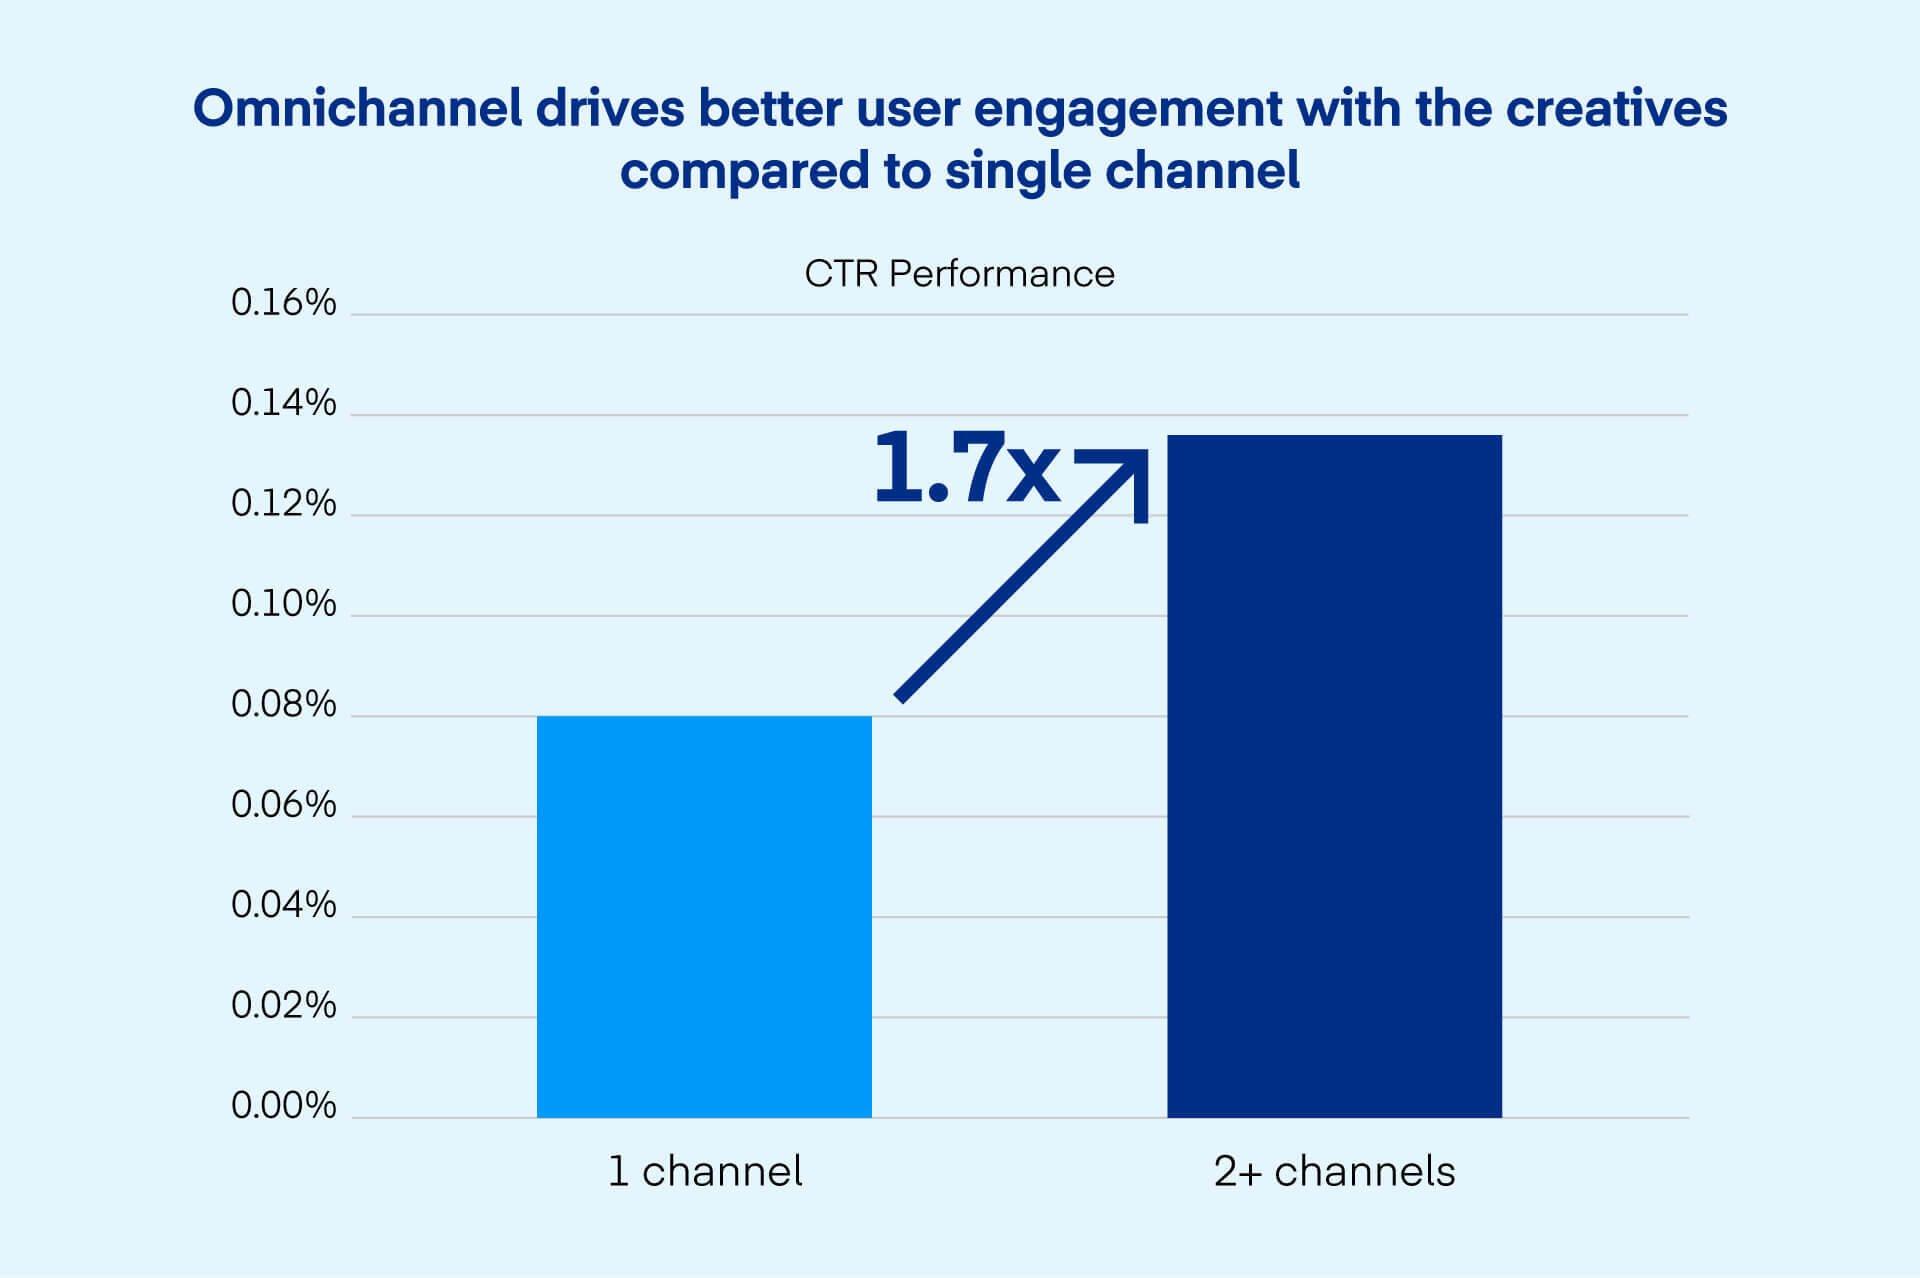 Omnichannel drives better user engagement with the creatives compared to single channel